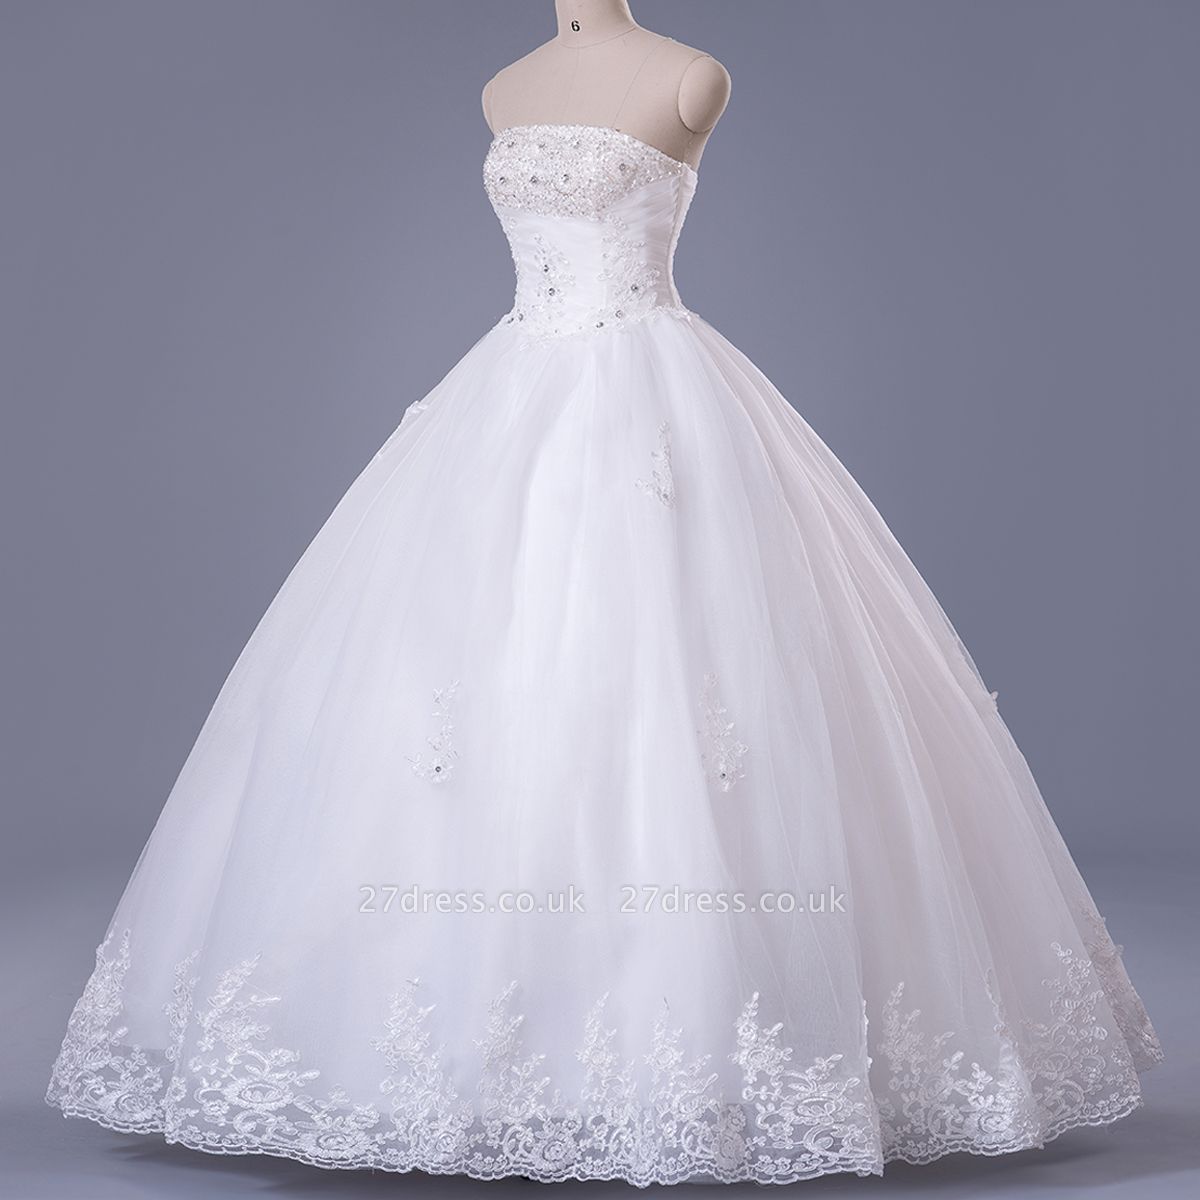 Elegant Strapless Sleeveless Wedding Dress Ball Gown With Lace Beadss